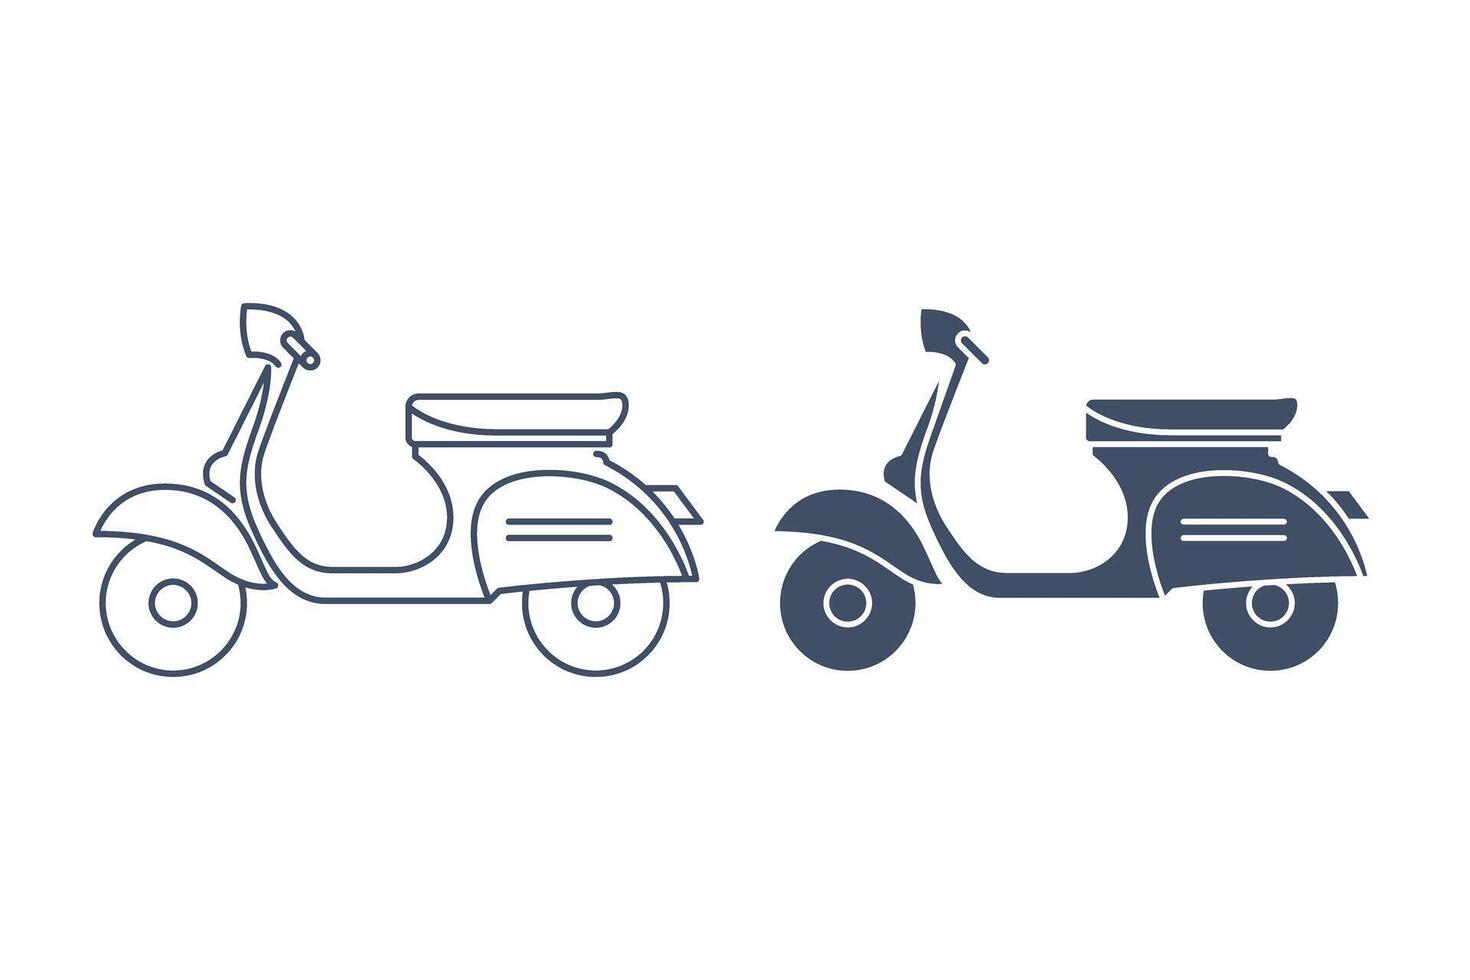 Scooter,  Linear icon and glyphicon vector